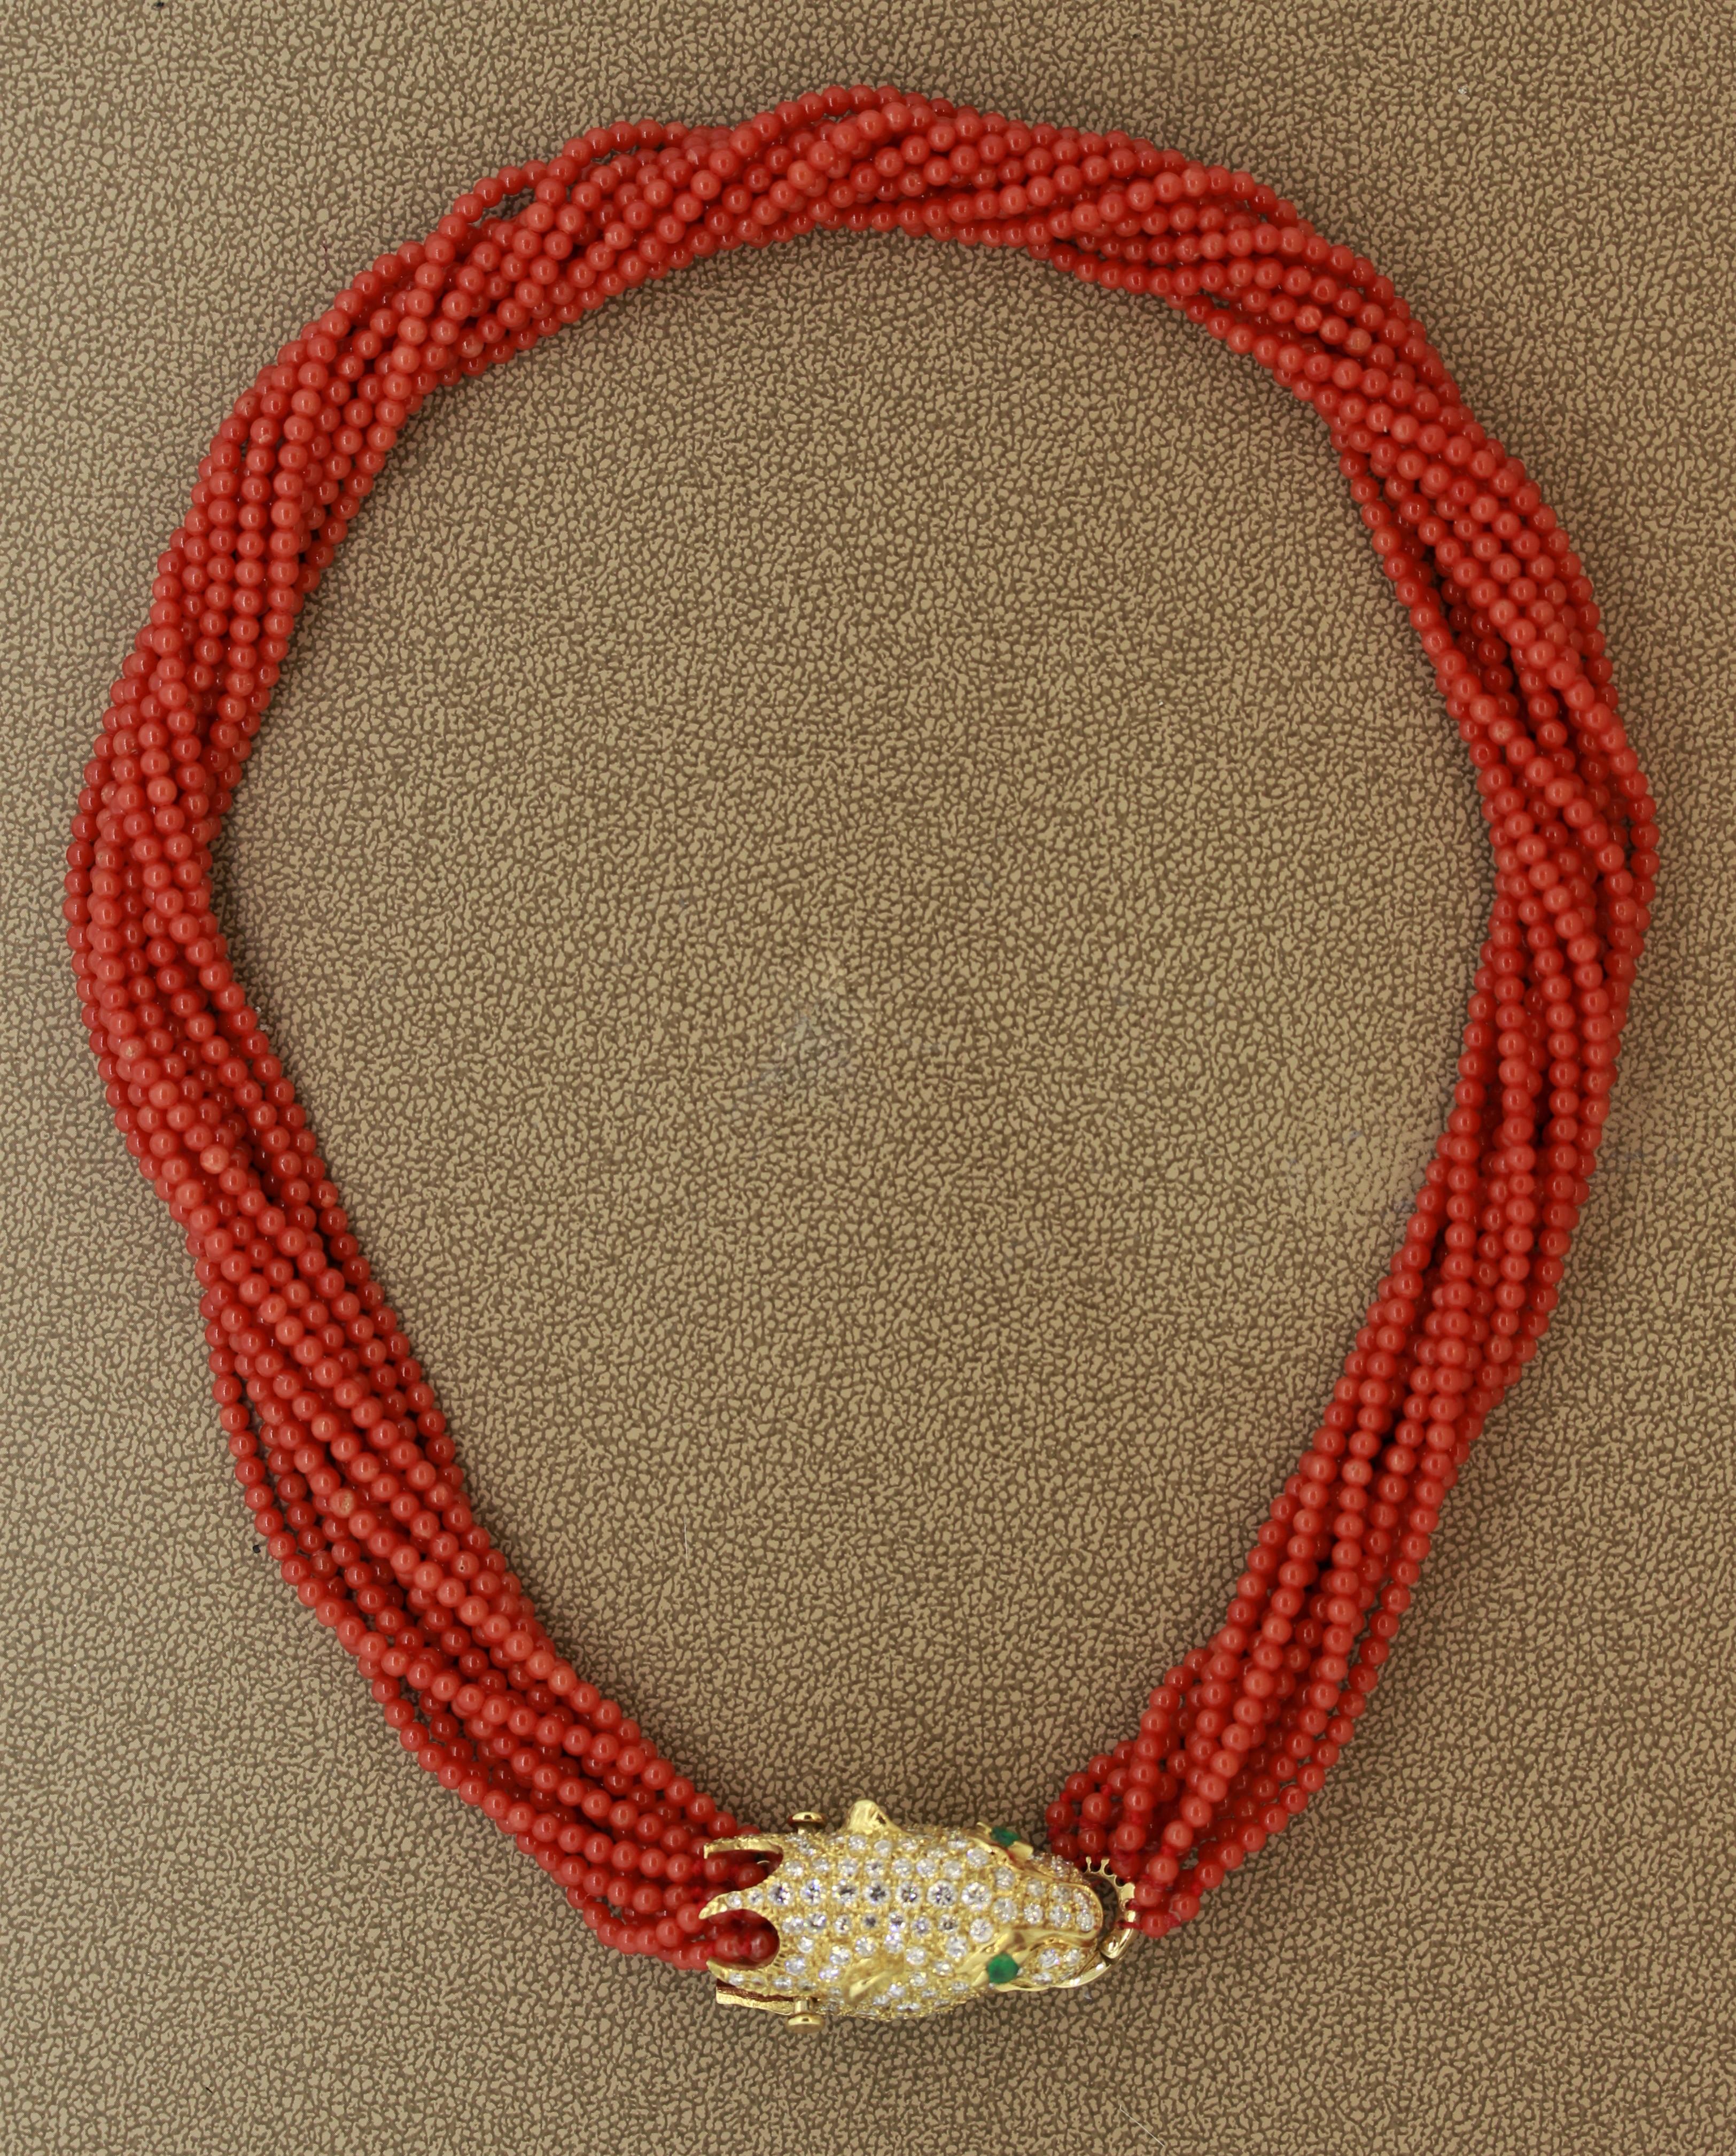 A fine quality necklace featuring 12 strands of natural coral from the Mediterranean Sea. The clasp is hand fabricated in 18k yellow gold as a panther and features approximately 4 carats of round brilliant cut diamonds and 2 vivid green emeralds as